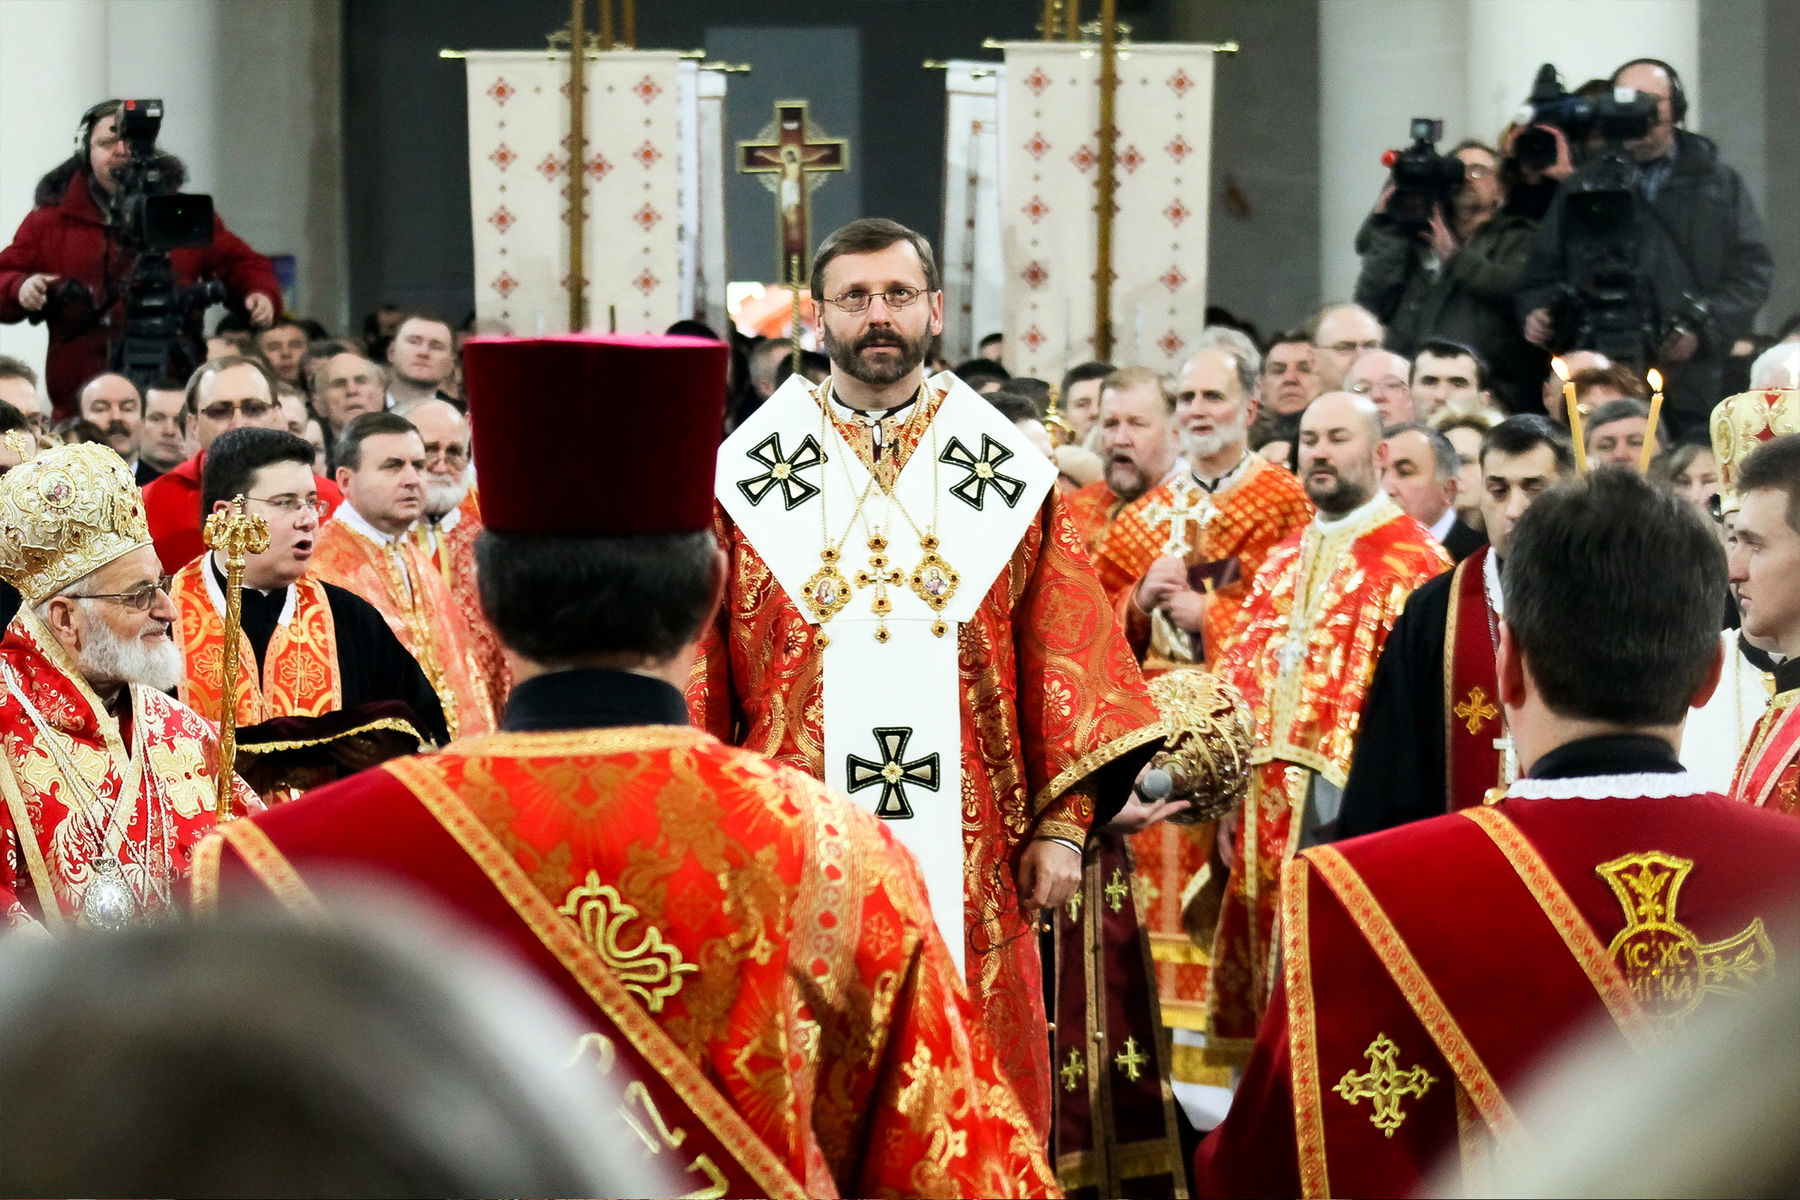 Twelve years since His Beatitude Sviatoslav, the Head of the UGCC, was enthroned. How was it?